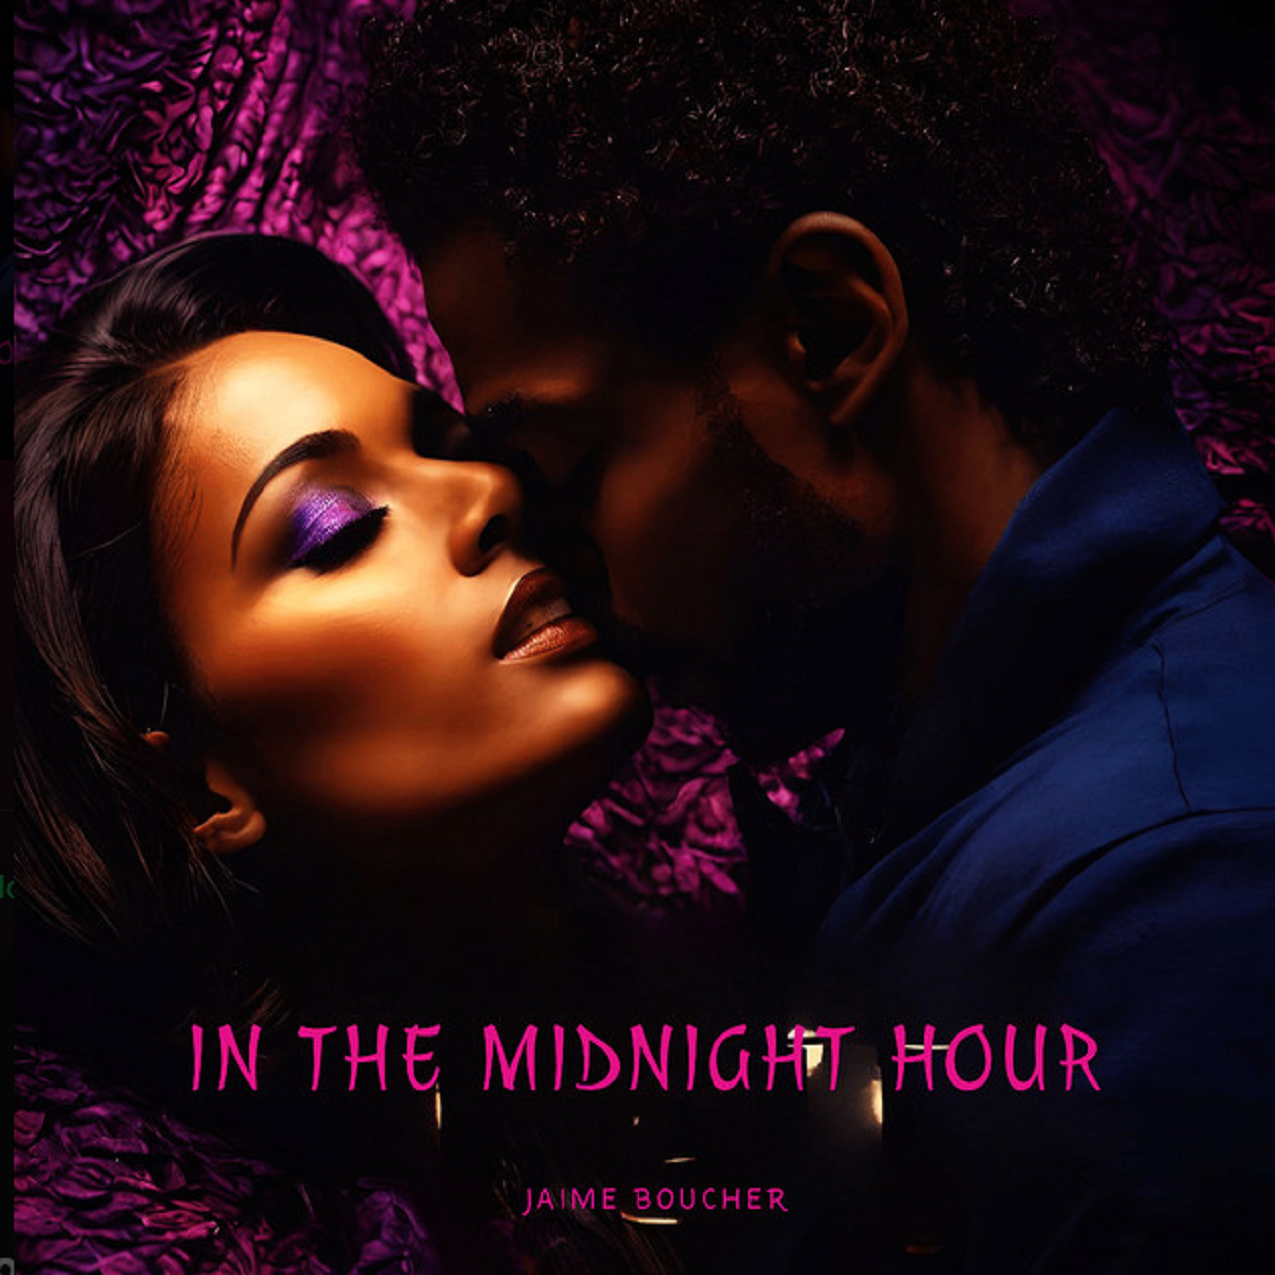 new from Jaime Boucher – The Midnight Hour